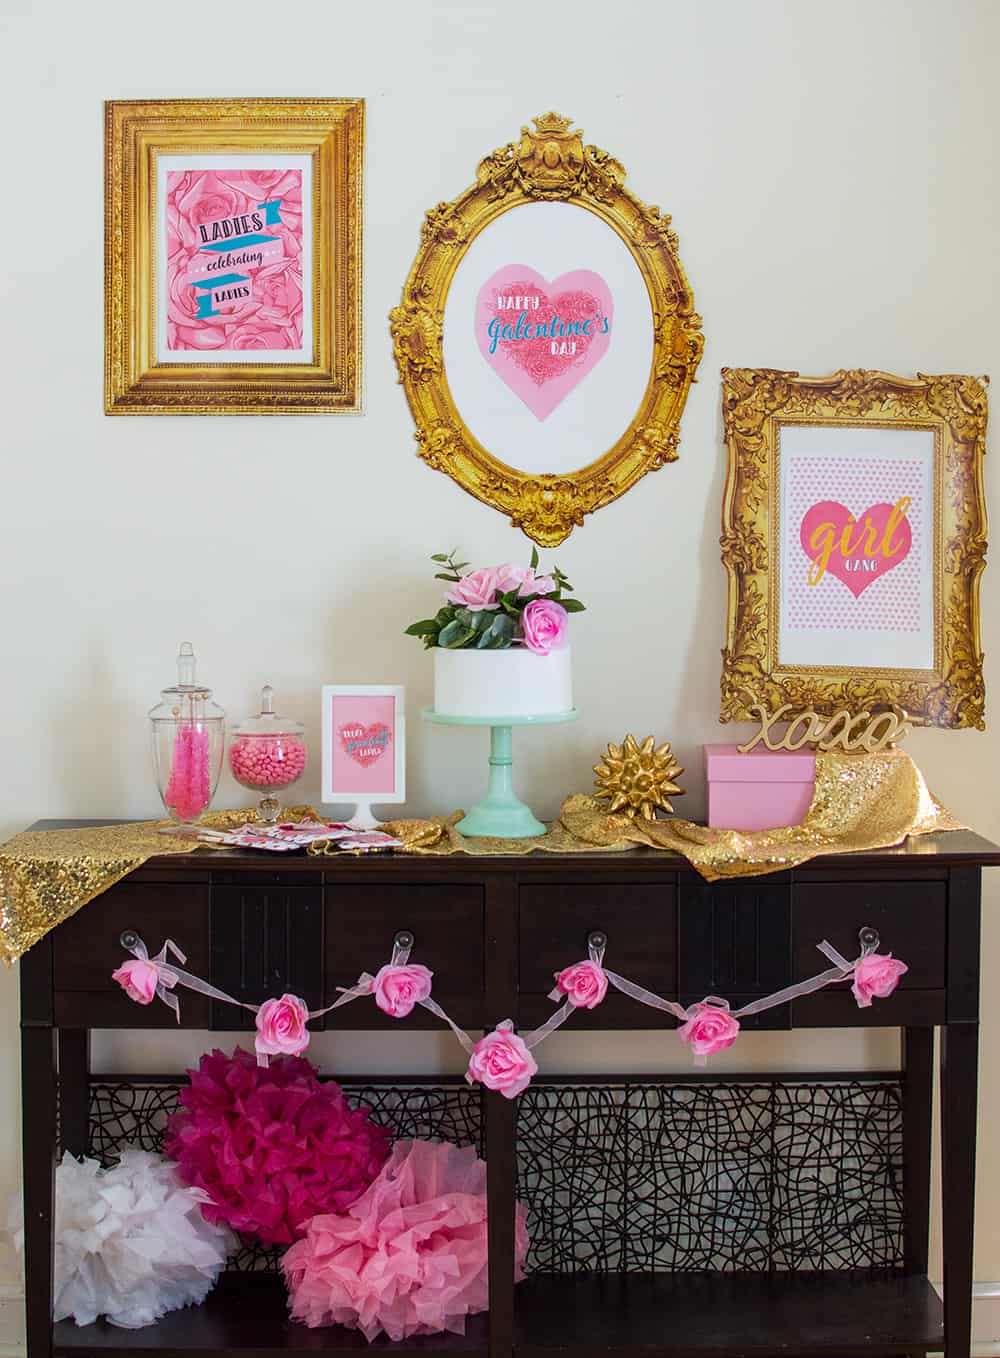 Girl Gang Galentine's Day Dessert Table styled by Elva M Design Studio. Learn how to put together this backdrop.